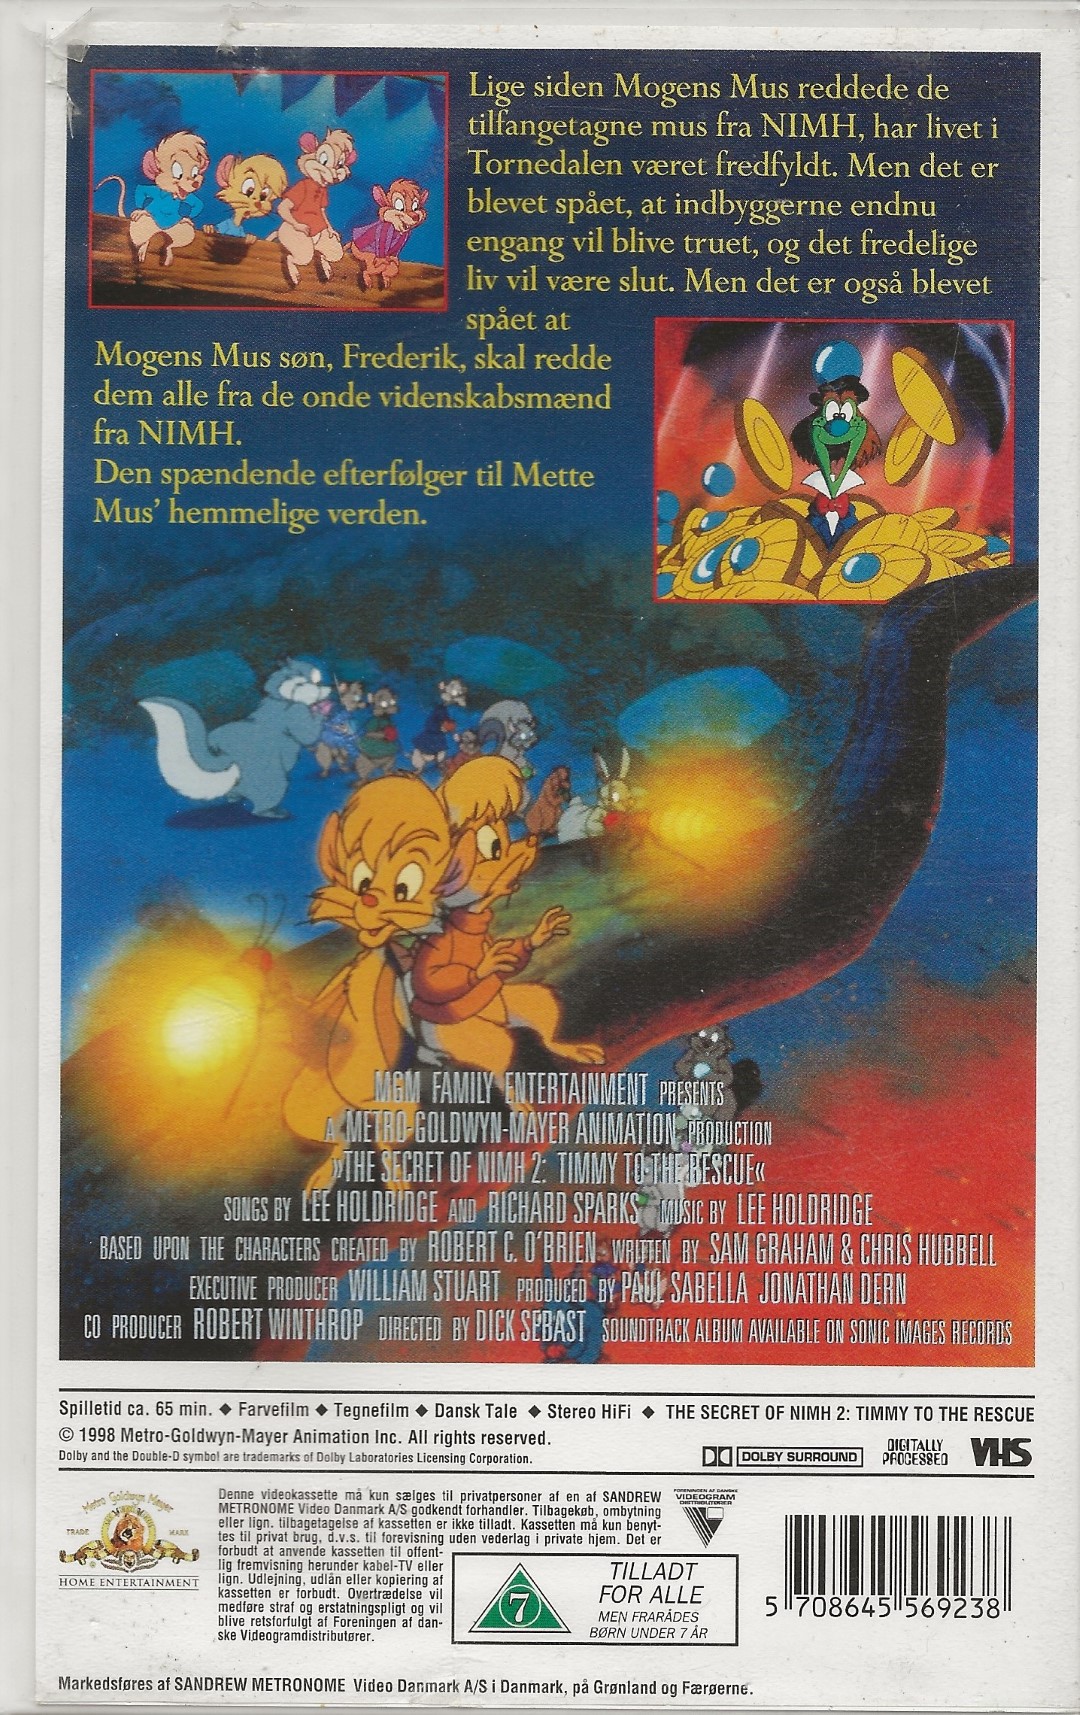 Mette Mus 2: Frederik Redder Tornedalen <p>Org.titel: The Secret of Nimh 2: Timmy to the Rescue</p> VHS MGM/UA Home Video 1998